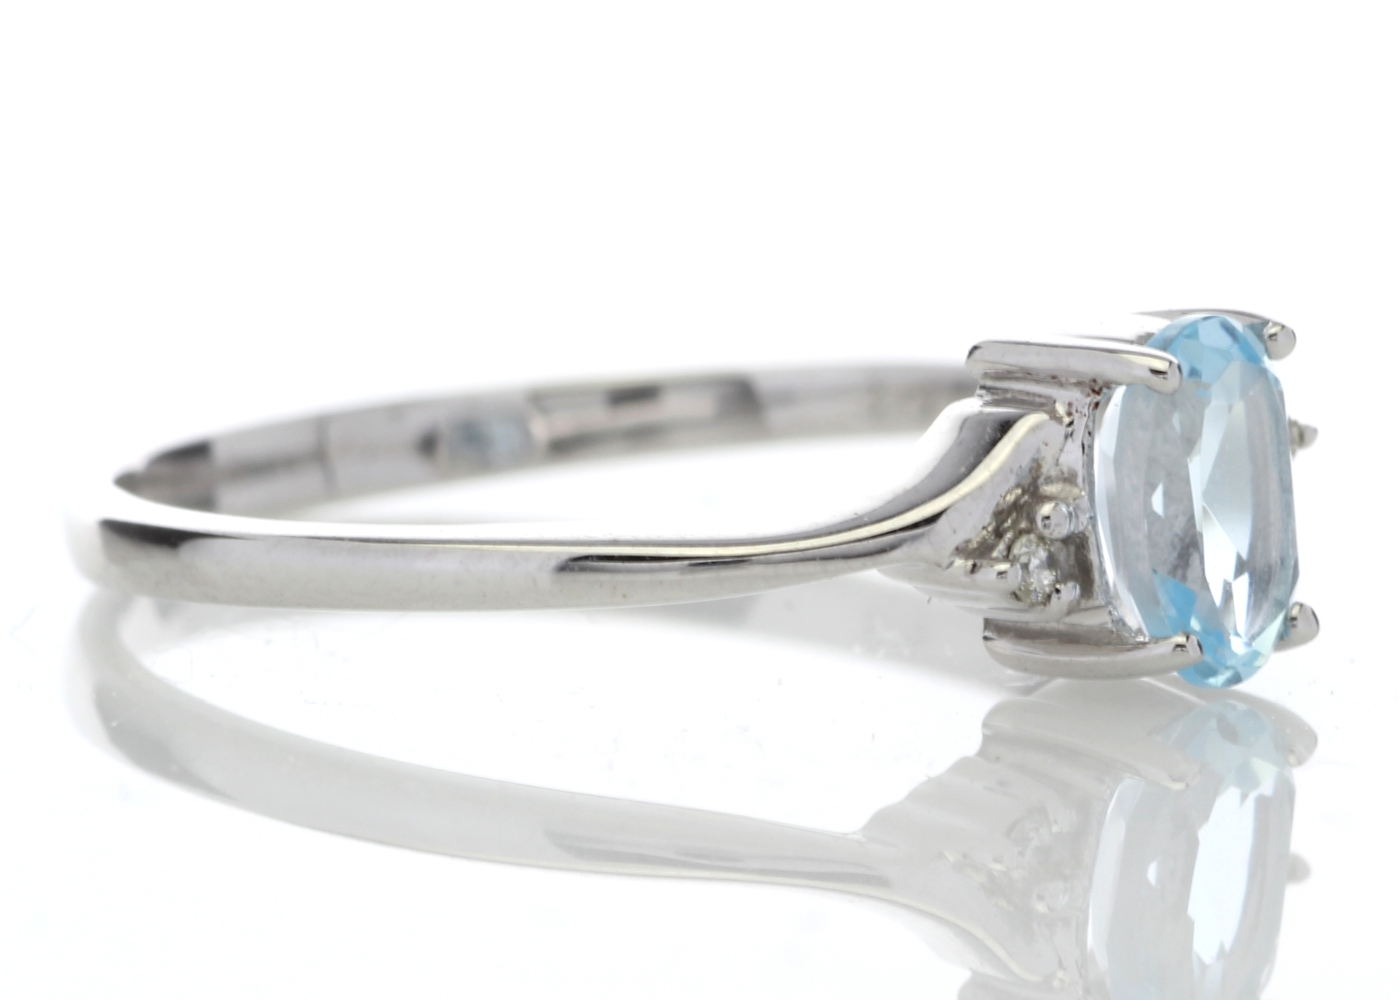 9ct White Gold Diamond and Oval Shape Blue Topaz Ring - Image 8 of 8